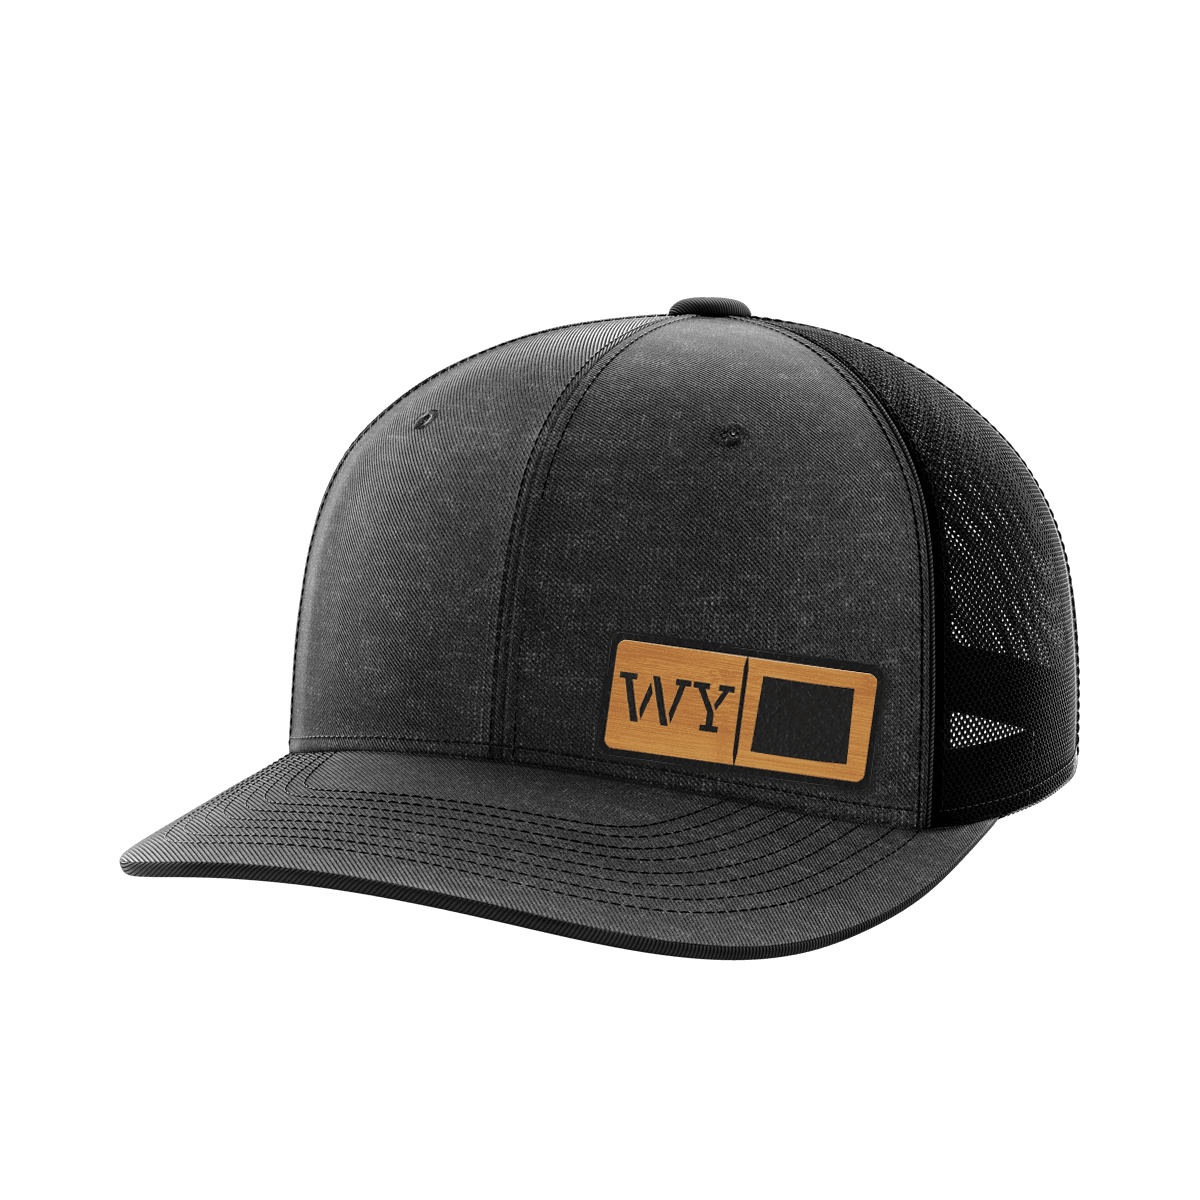 Wyoming Homegrown Hats - Greater Half